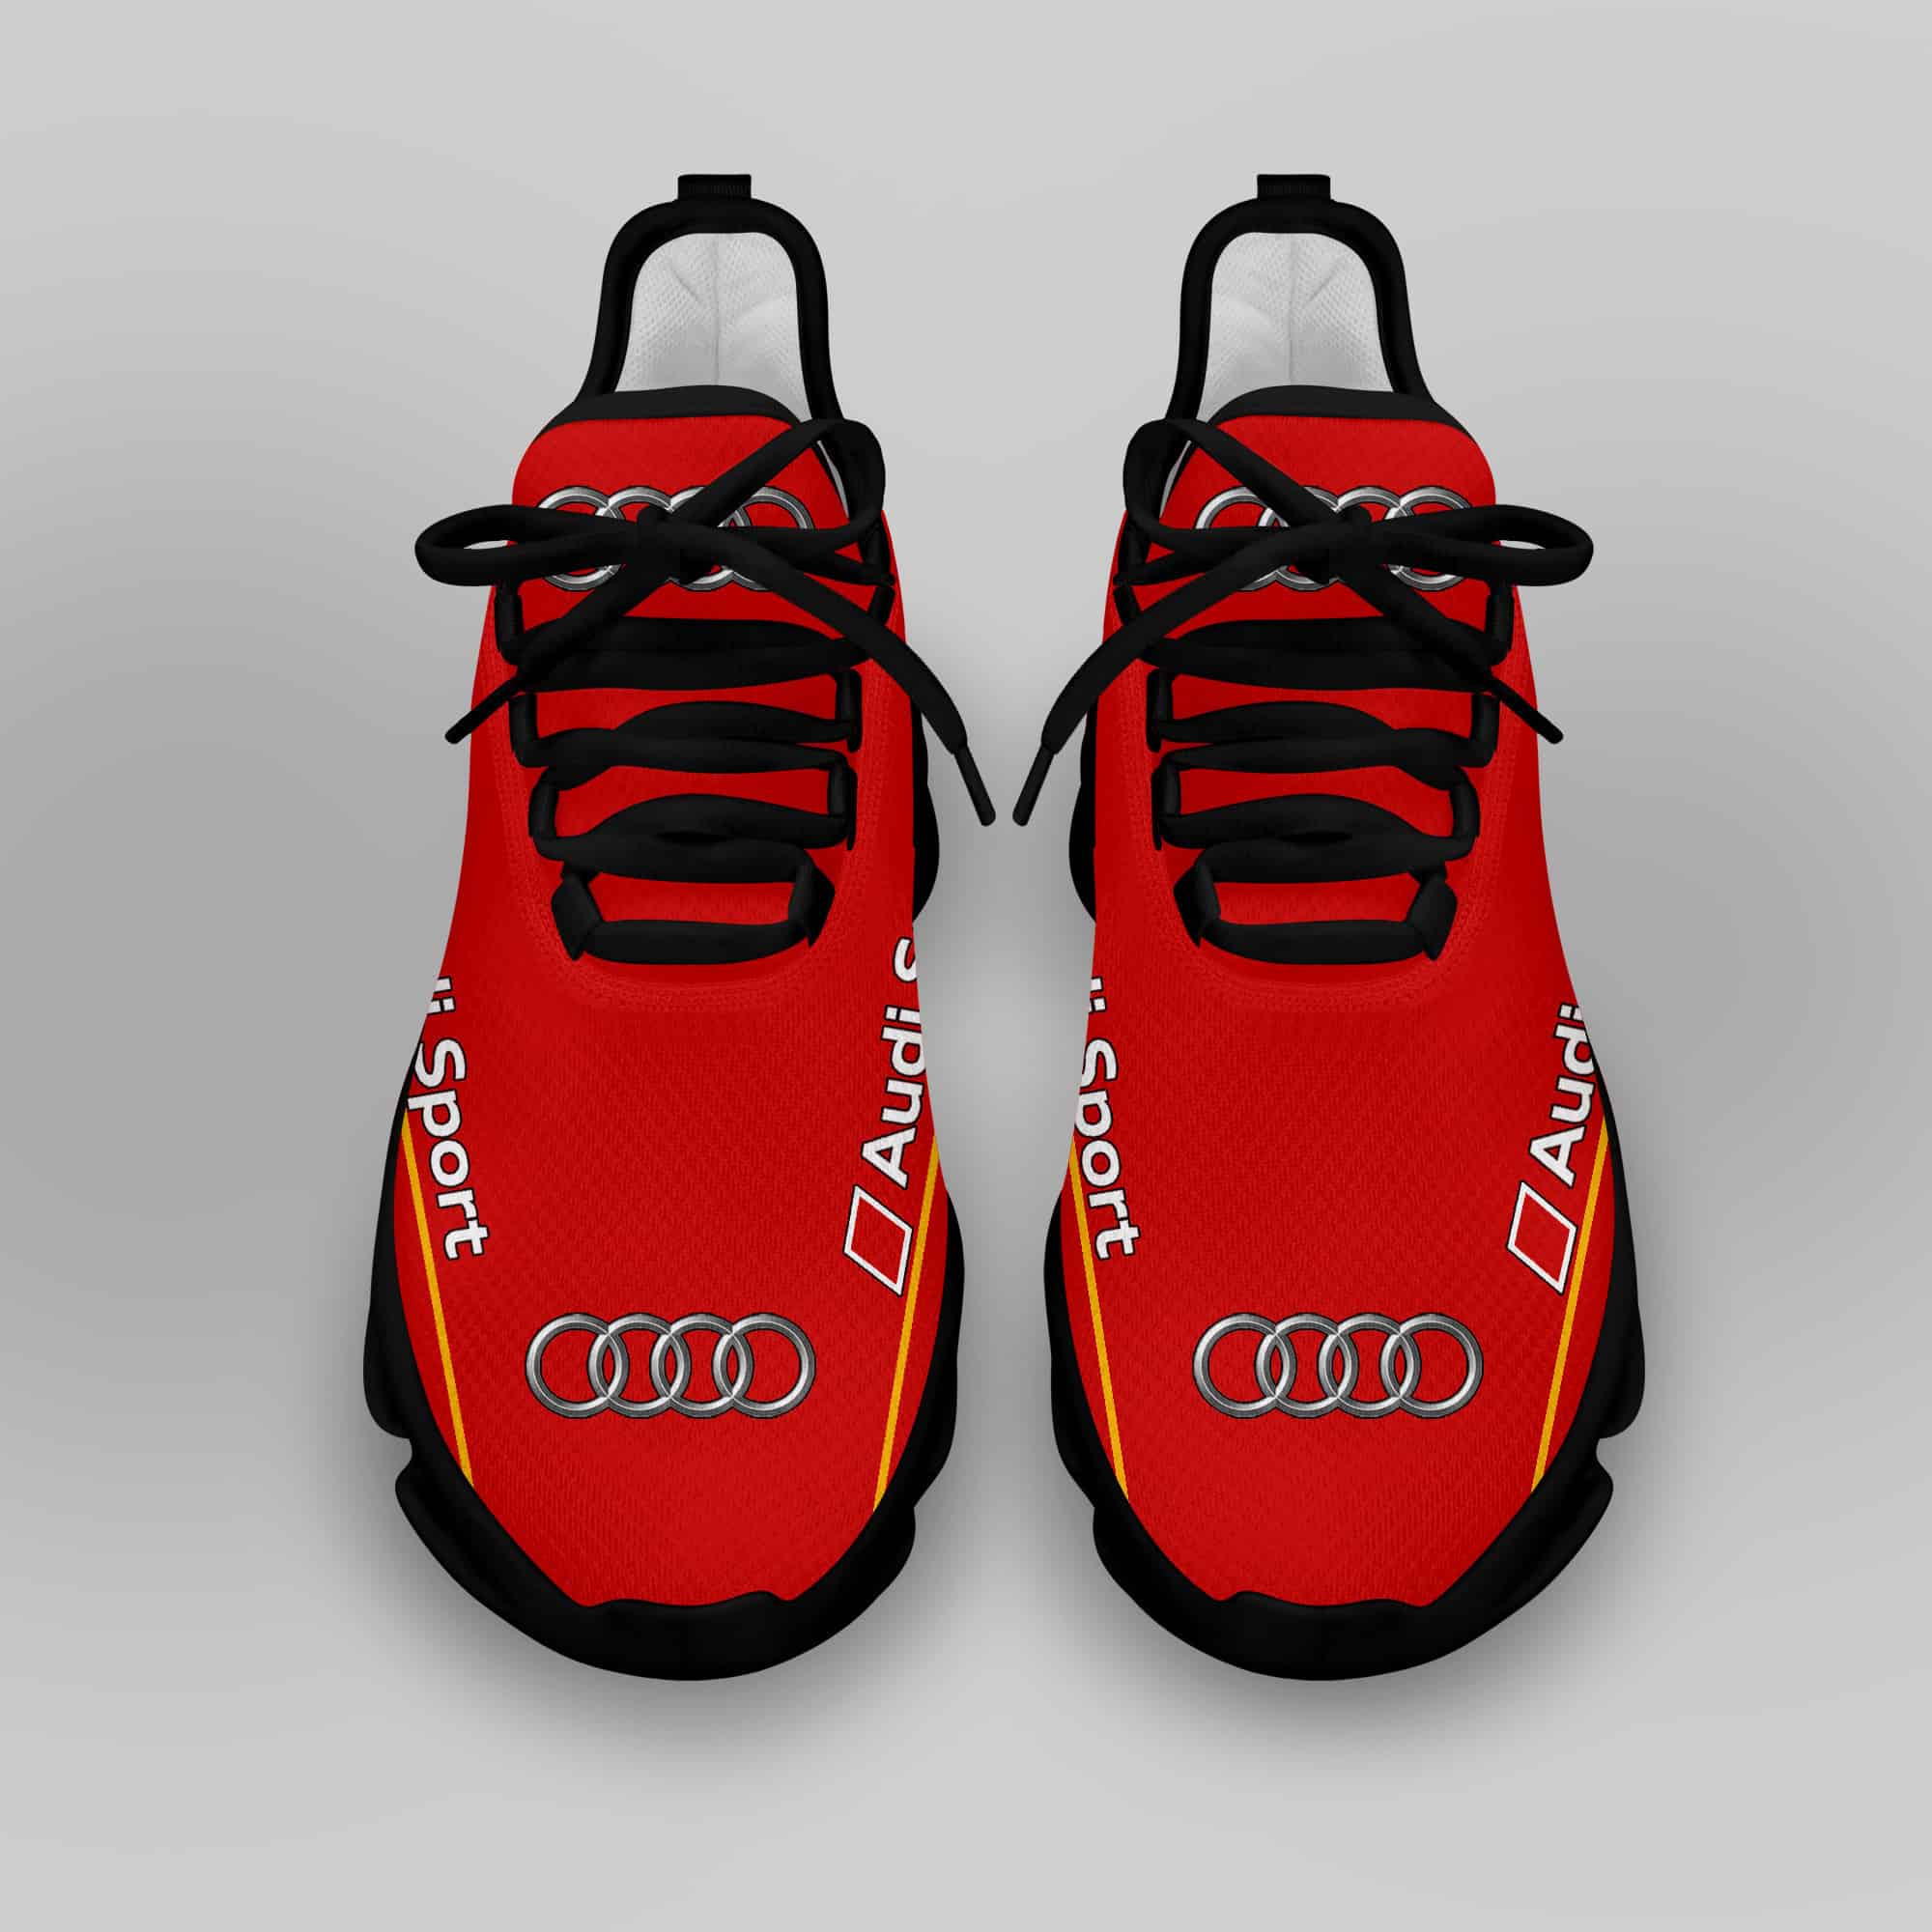 Audi Sport Running Shoes Max Soul Shoes Sneakers Ver 14 4